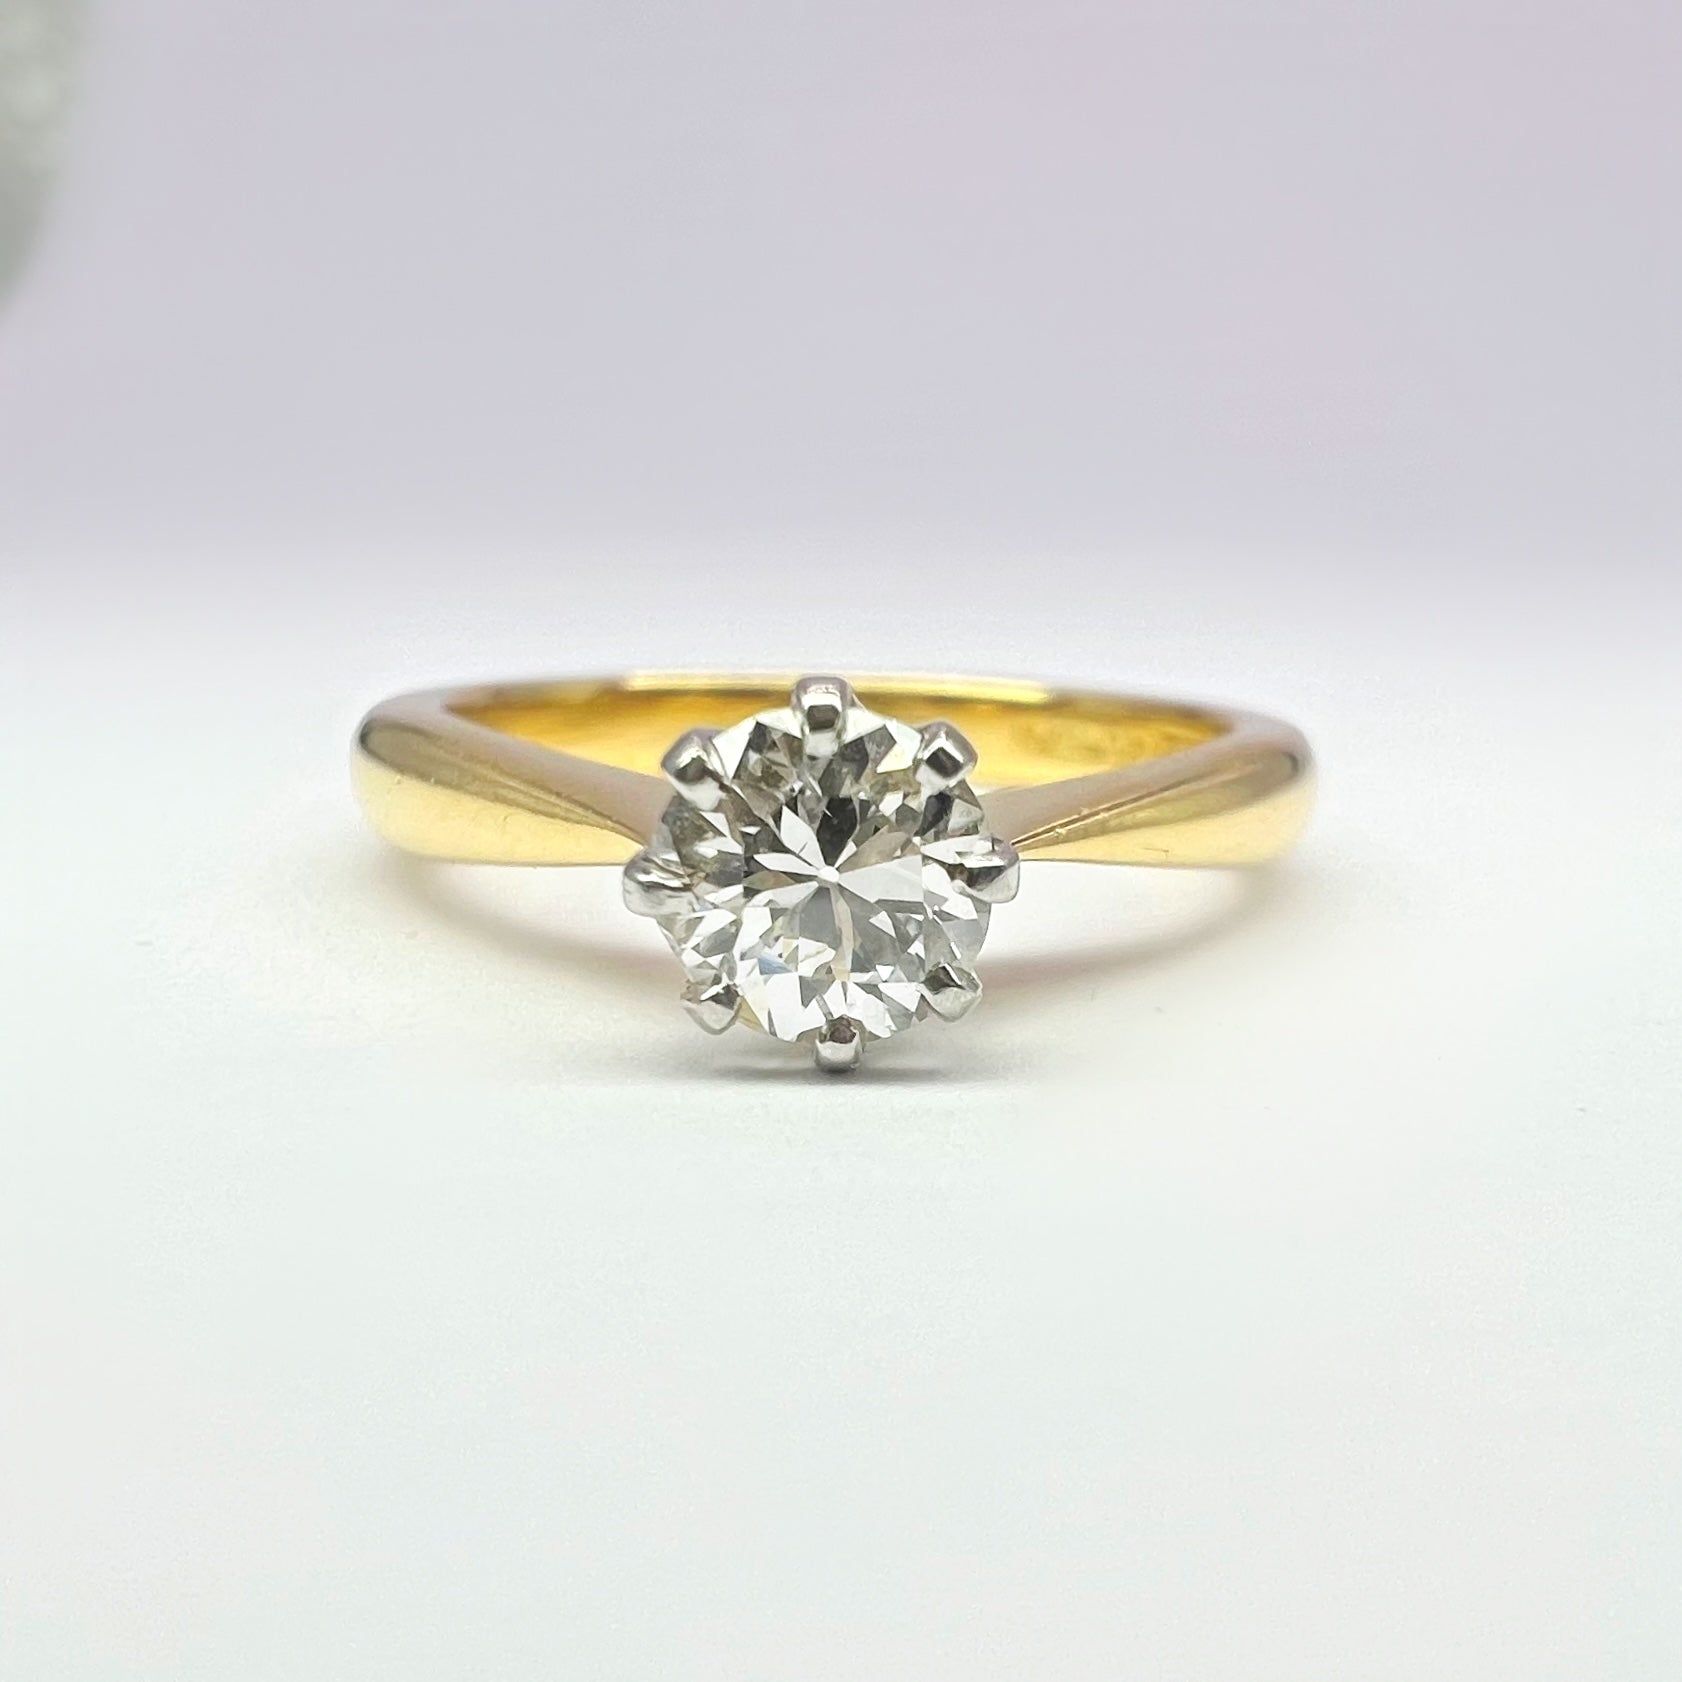 Vintage 0.35ct Diamond Solitaire Ring